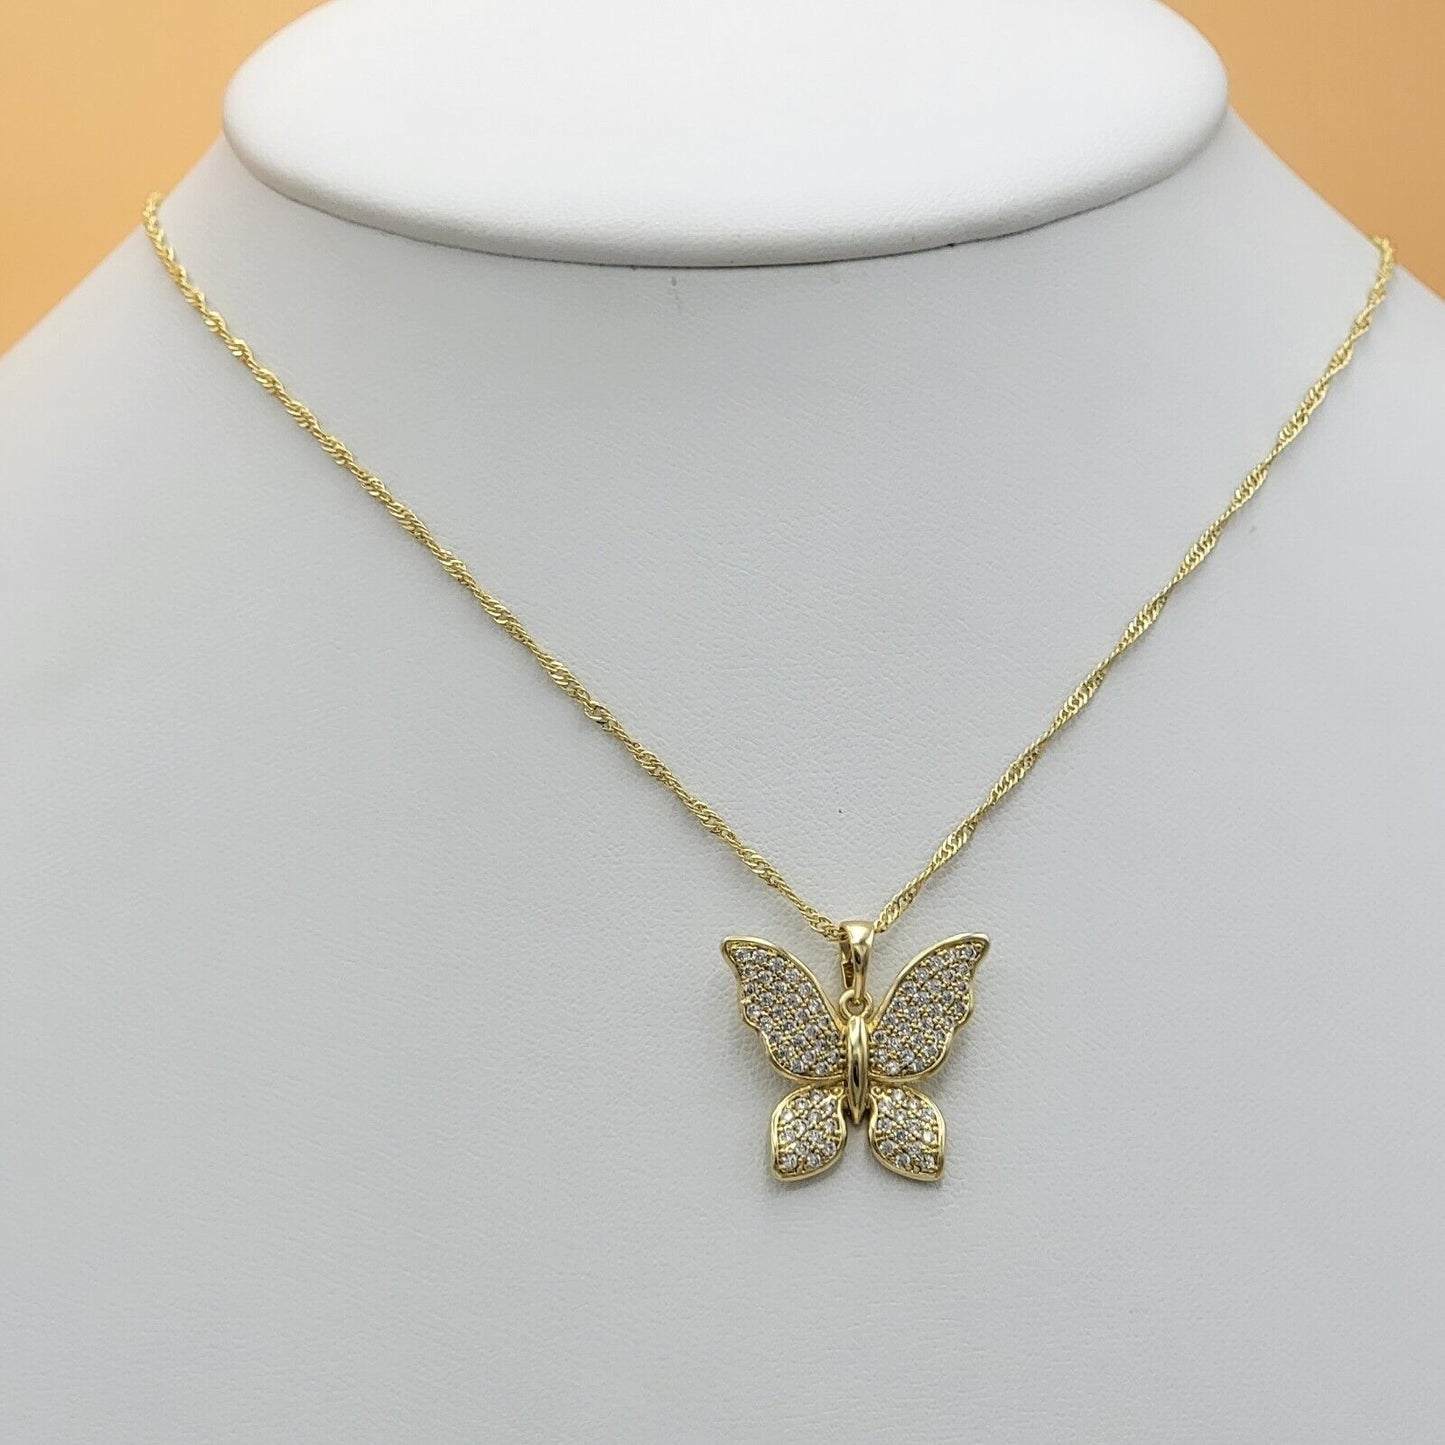 Necklaces - 14K Gold Plated. Icy Butterfly Pendant & Chain.